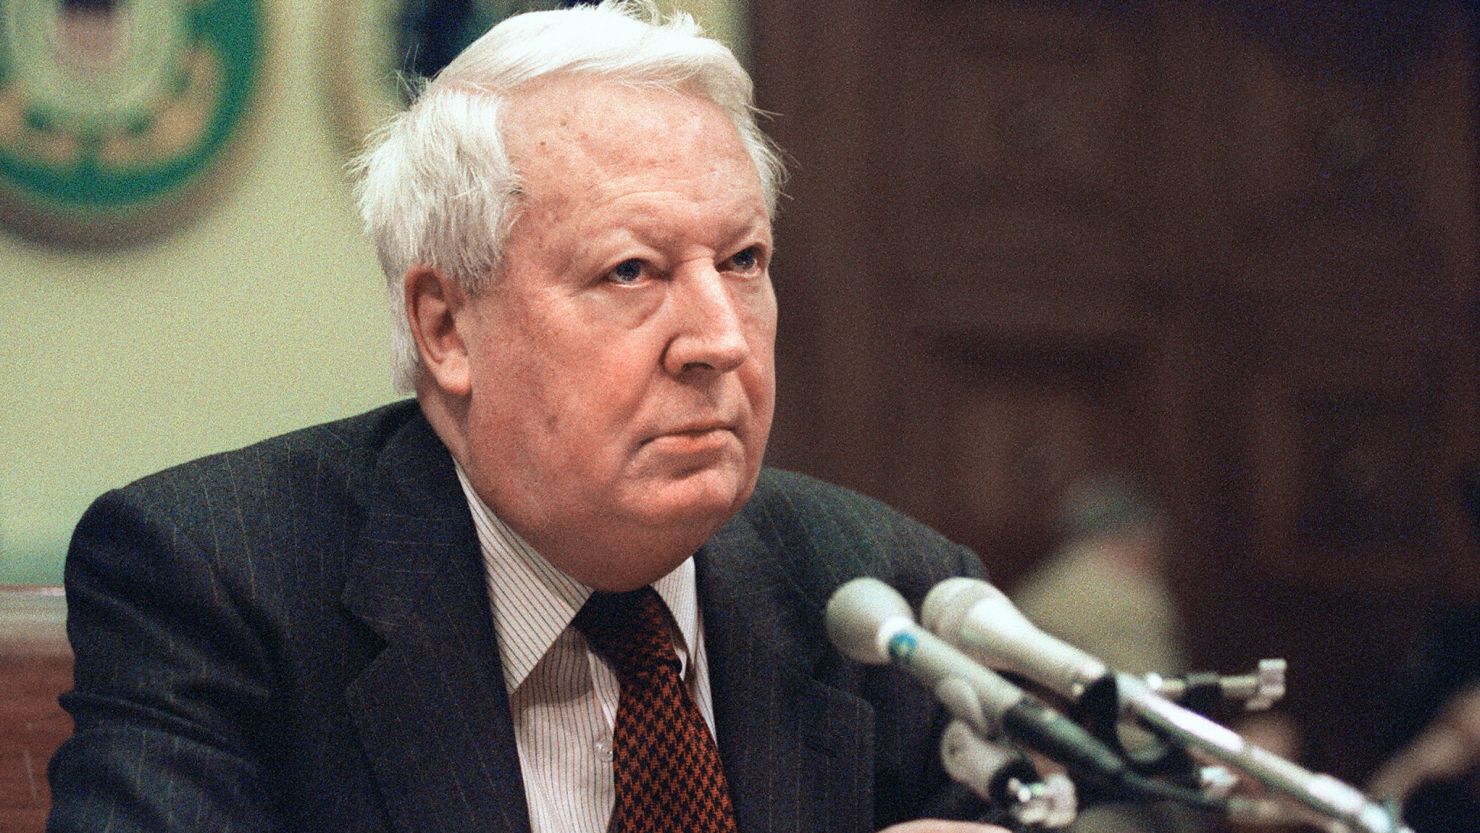 The late British Prime Minister Edward Heath, pictured in 1990.